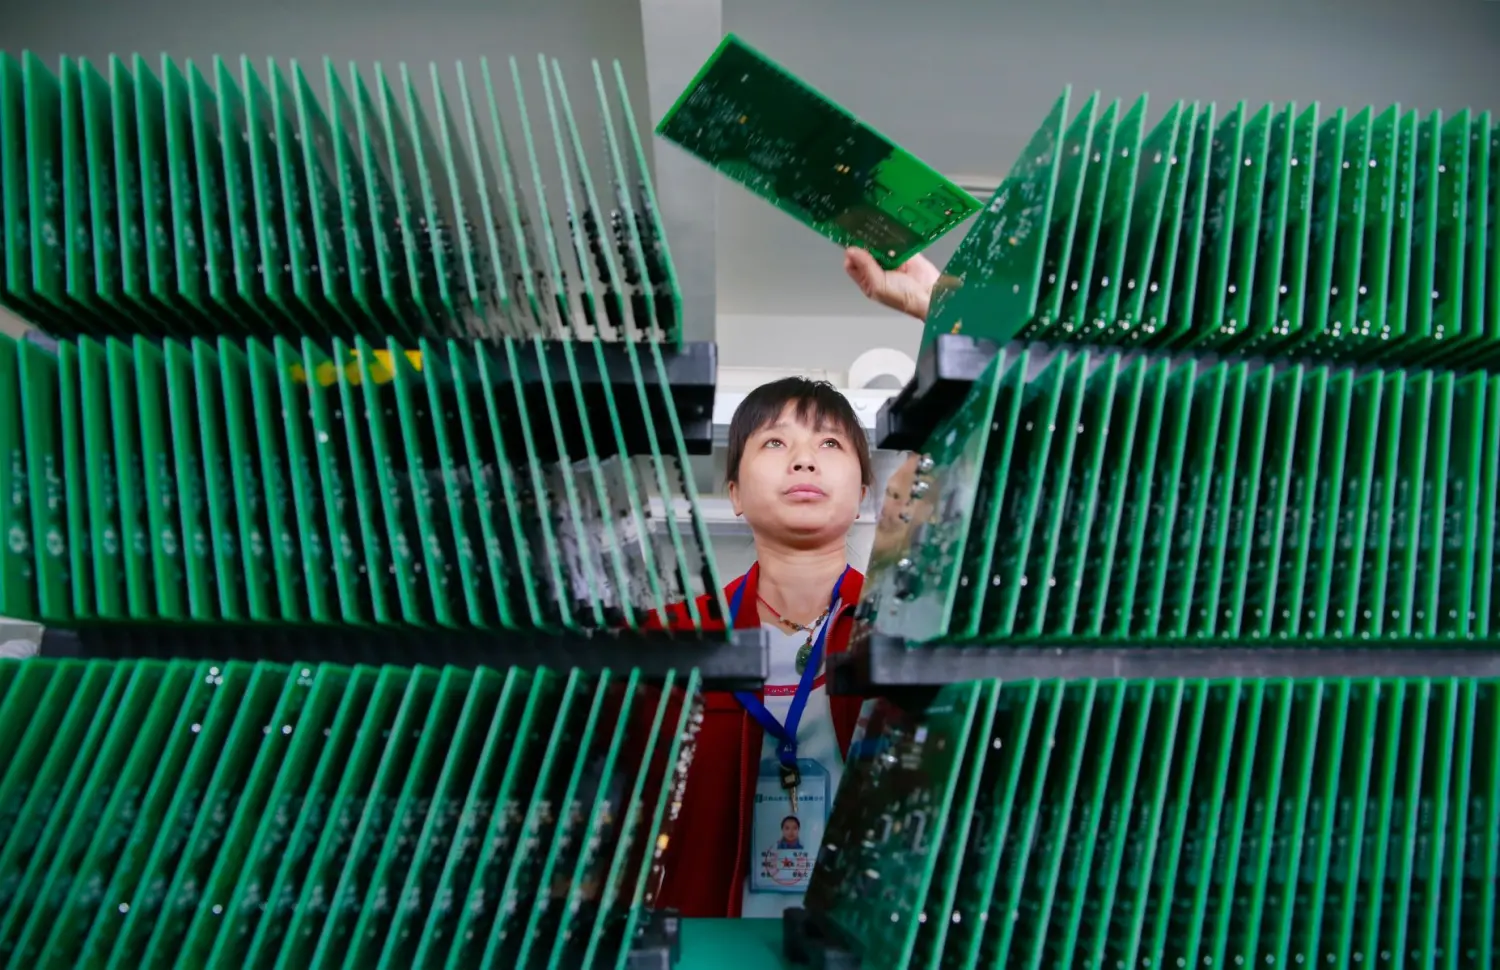 A female industrial worker places the final circuit board on top of a large stack.